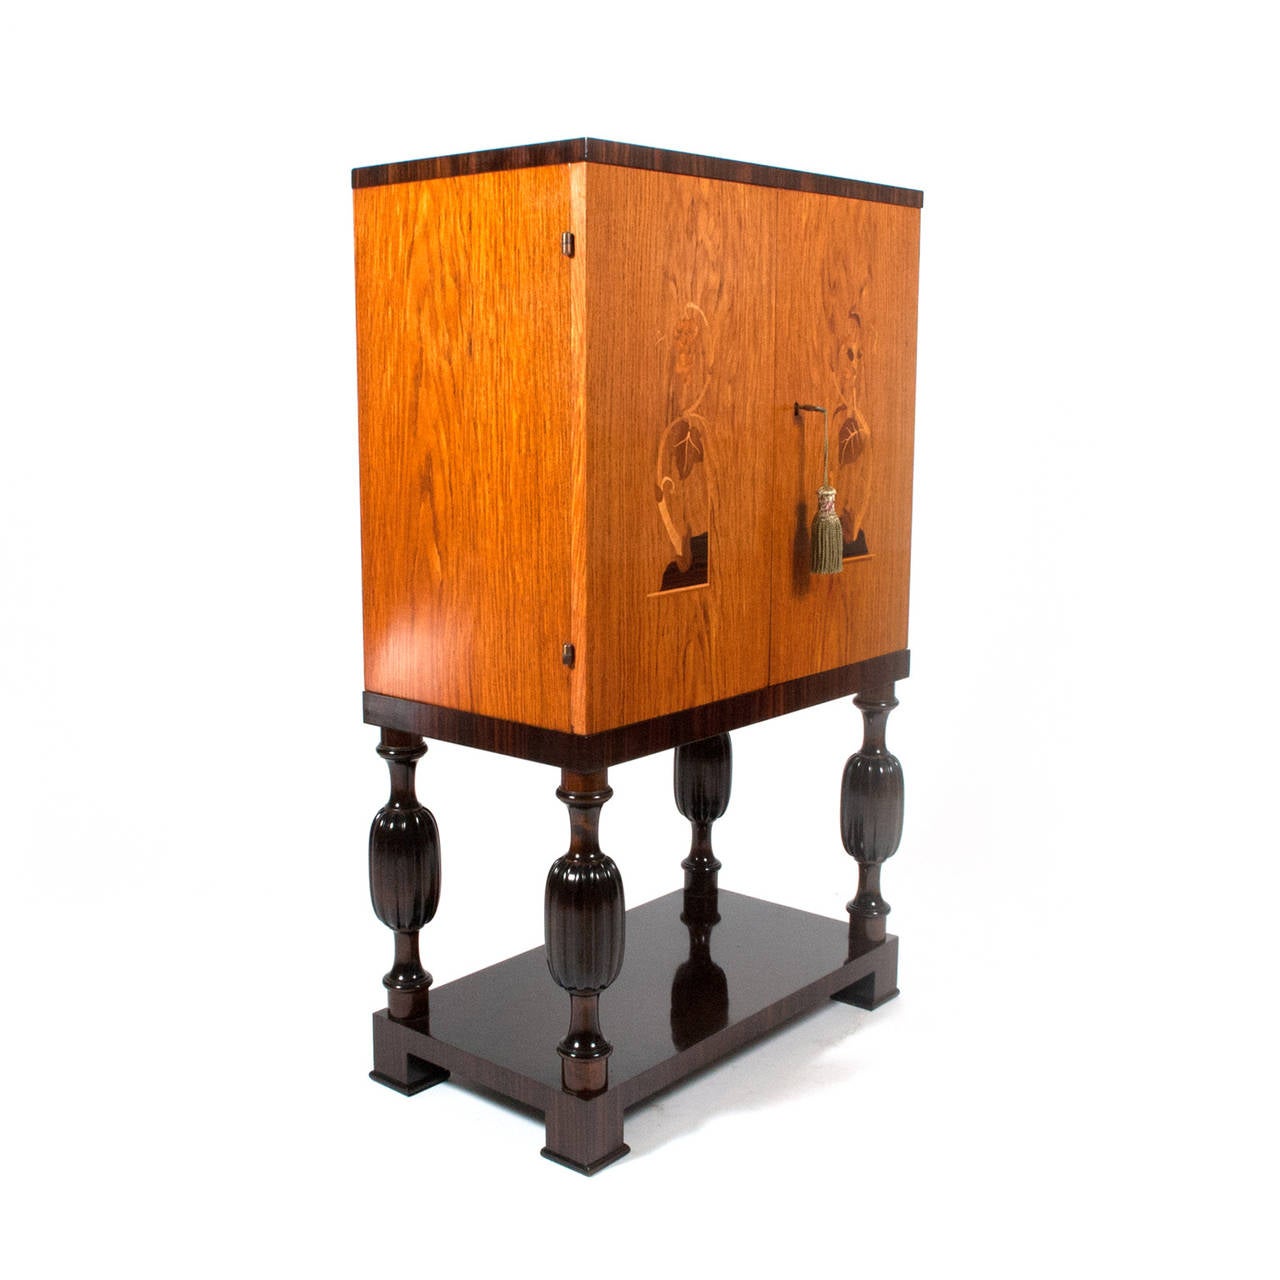 Original condition two-door inlay cabinet with various exotic woods, shelves and two drawers in mahogany, legs and shelf below dark stain birchwood.